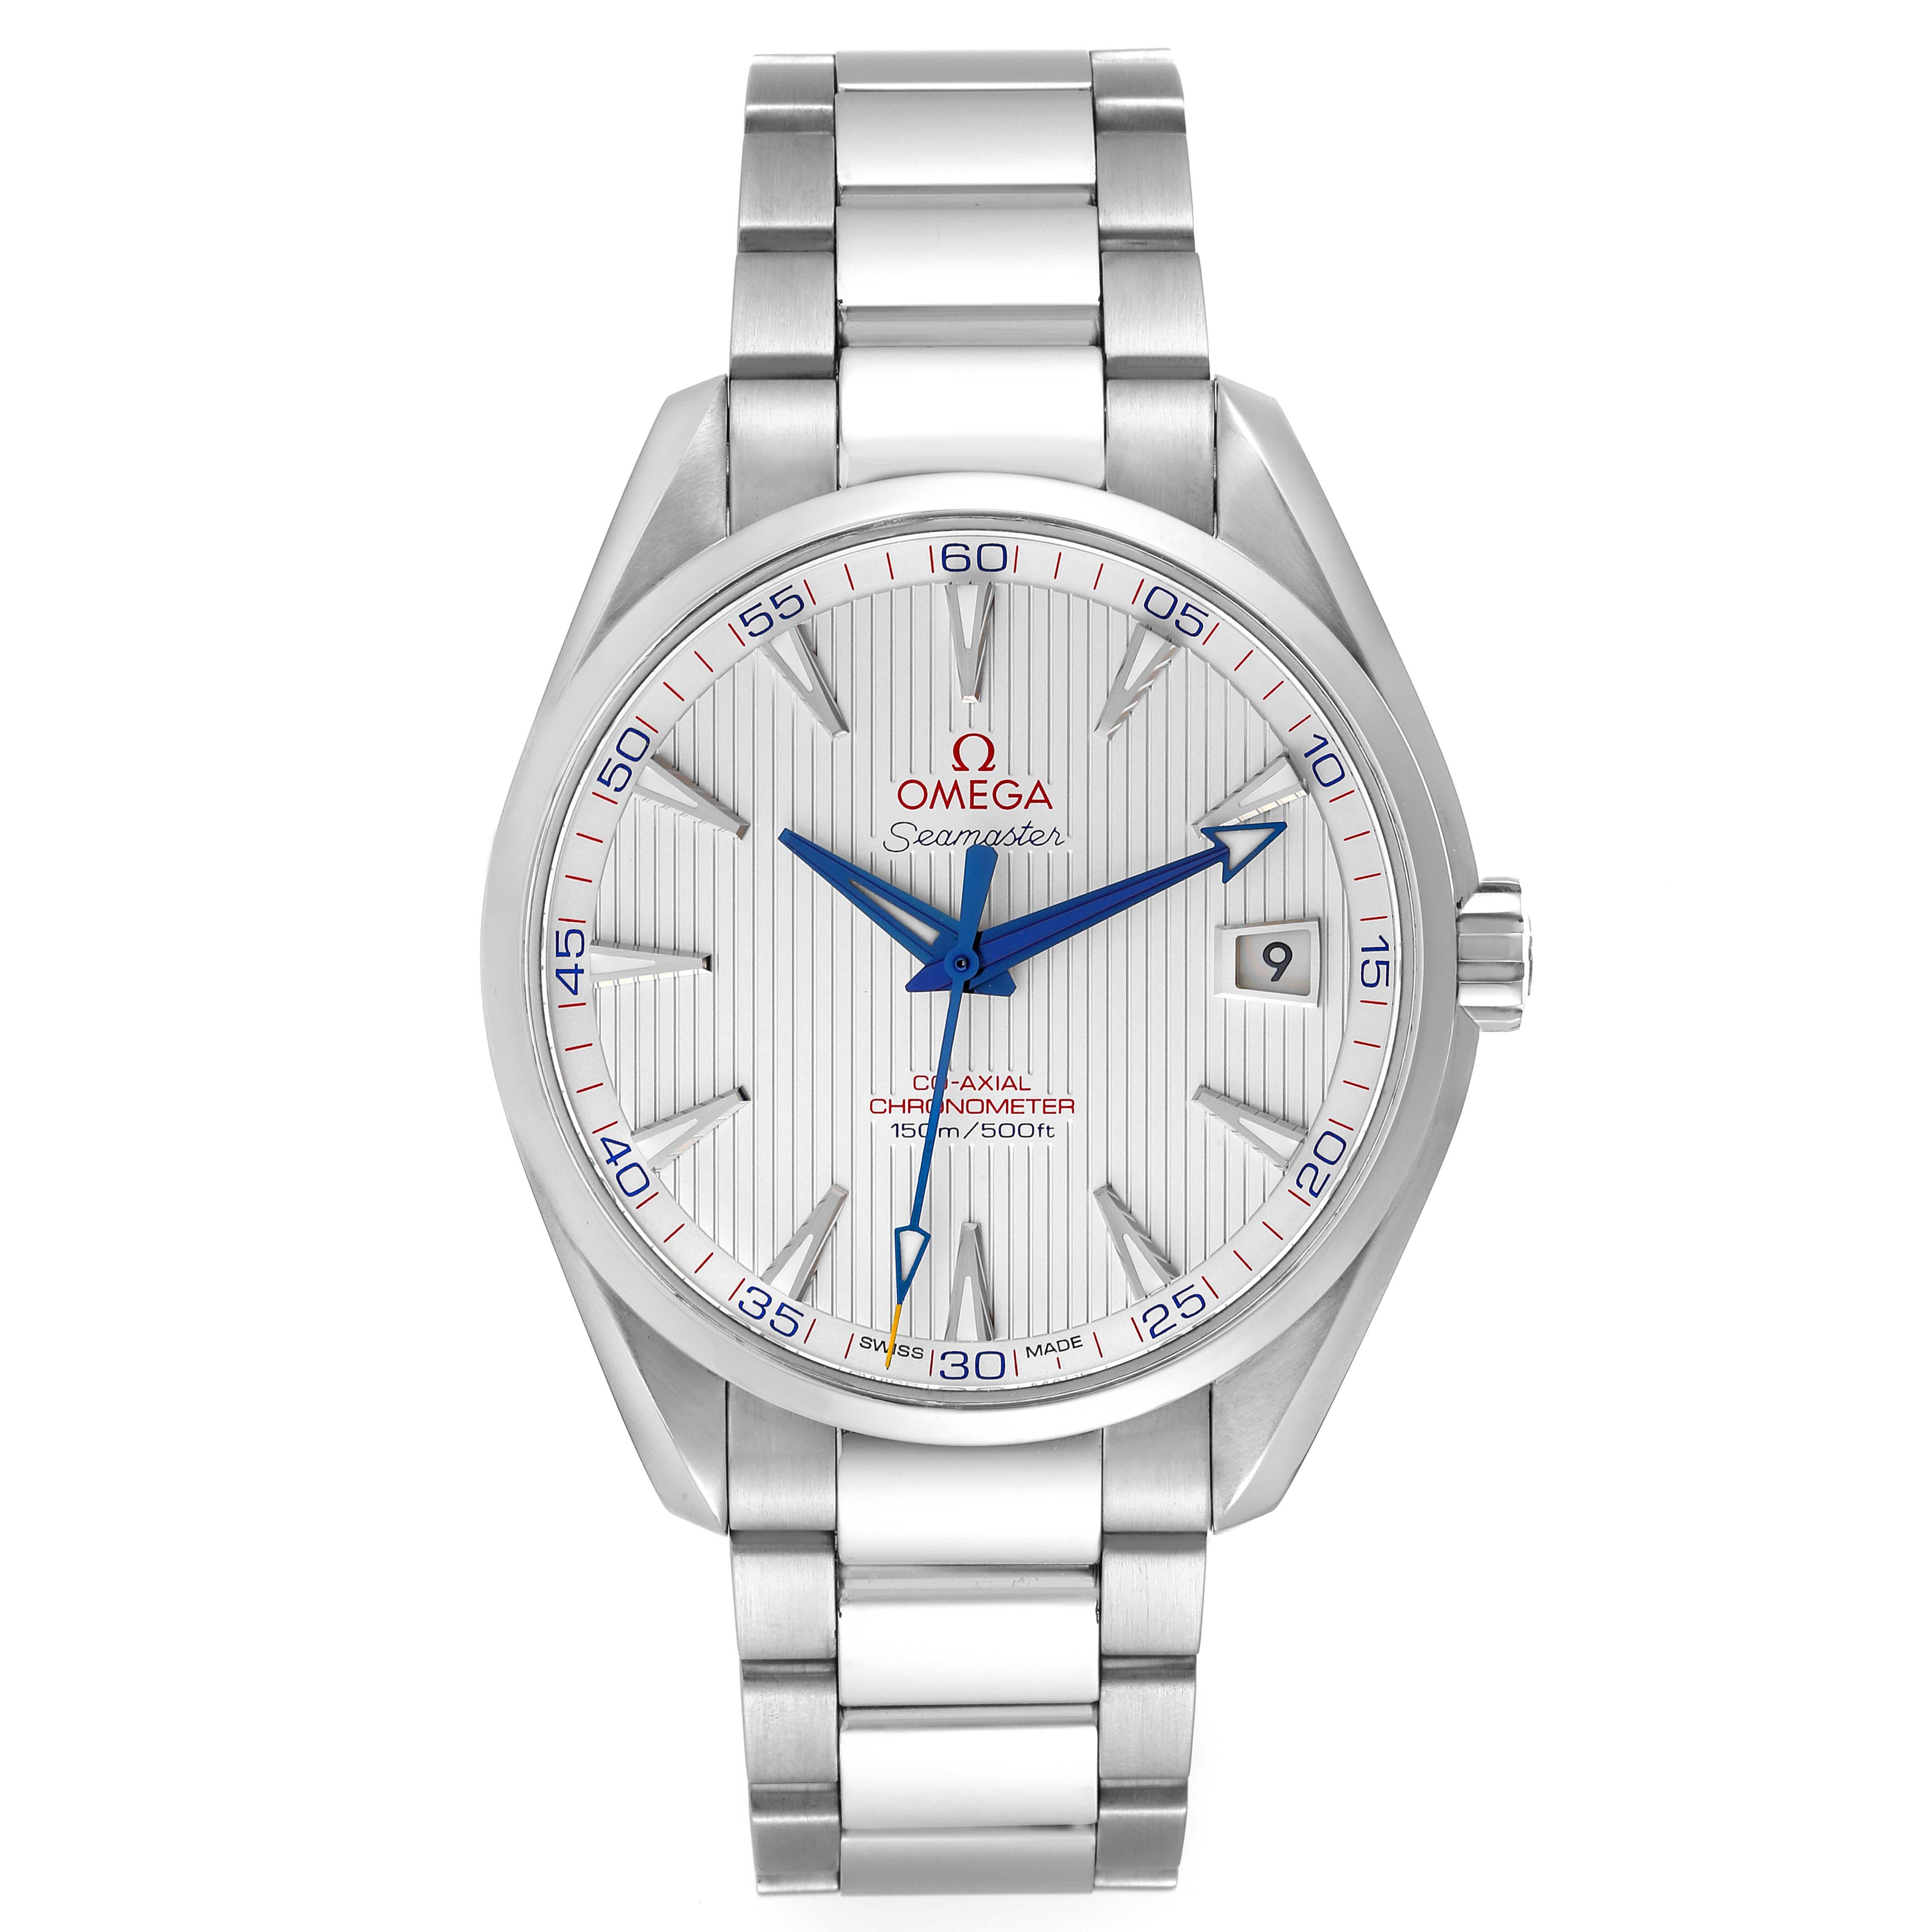 Omega Seamaster Aqua Terra Steel Mens Watch 231.10.42.21.02.002 Box Card. Automatic self-winding movement. Stainless steel round case 41.5 mm in diameter. Transparent exhibition sapphire crystal case back. Stainless steel smooth bezel. Scratch